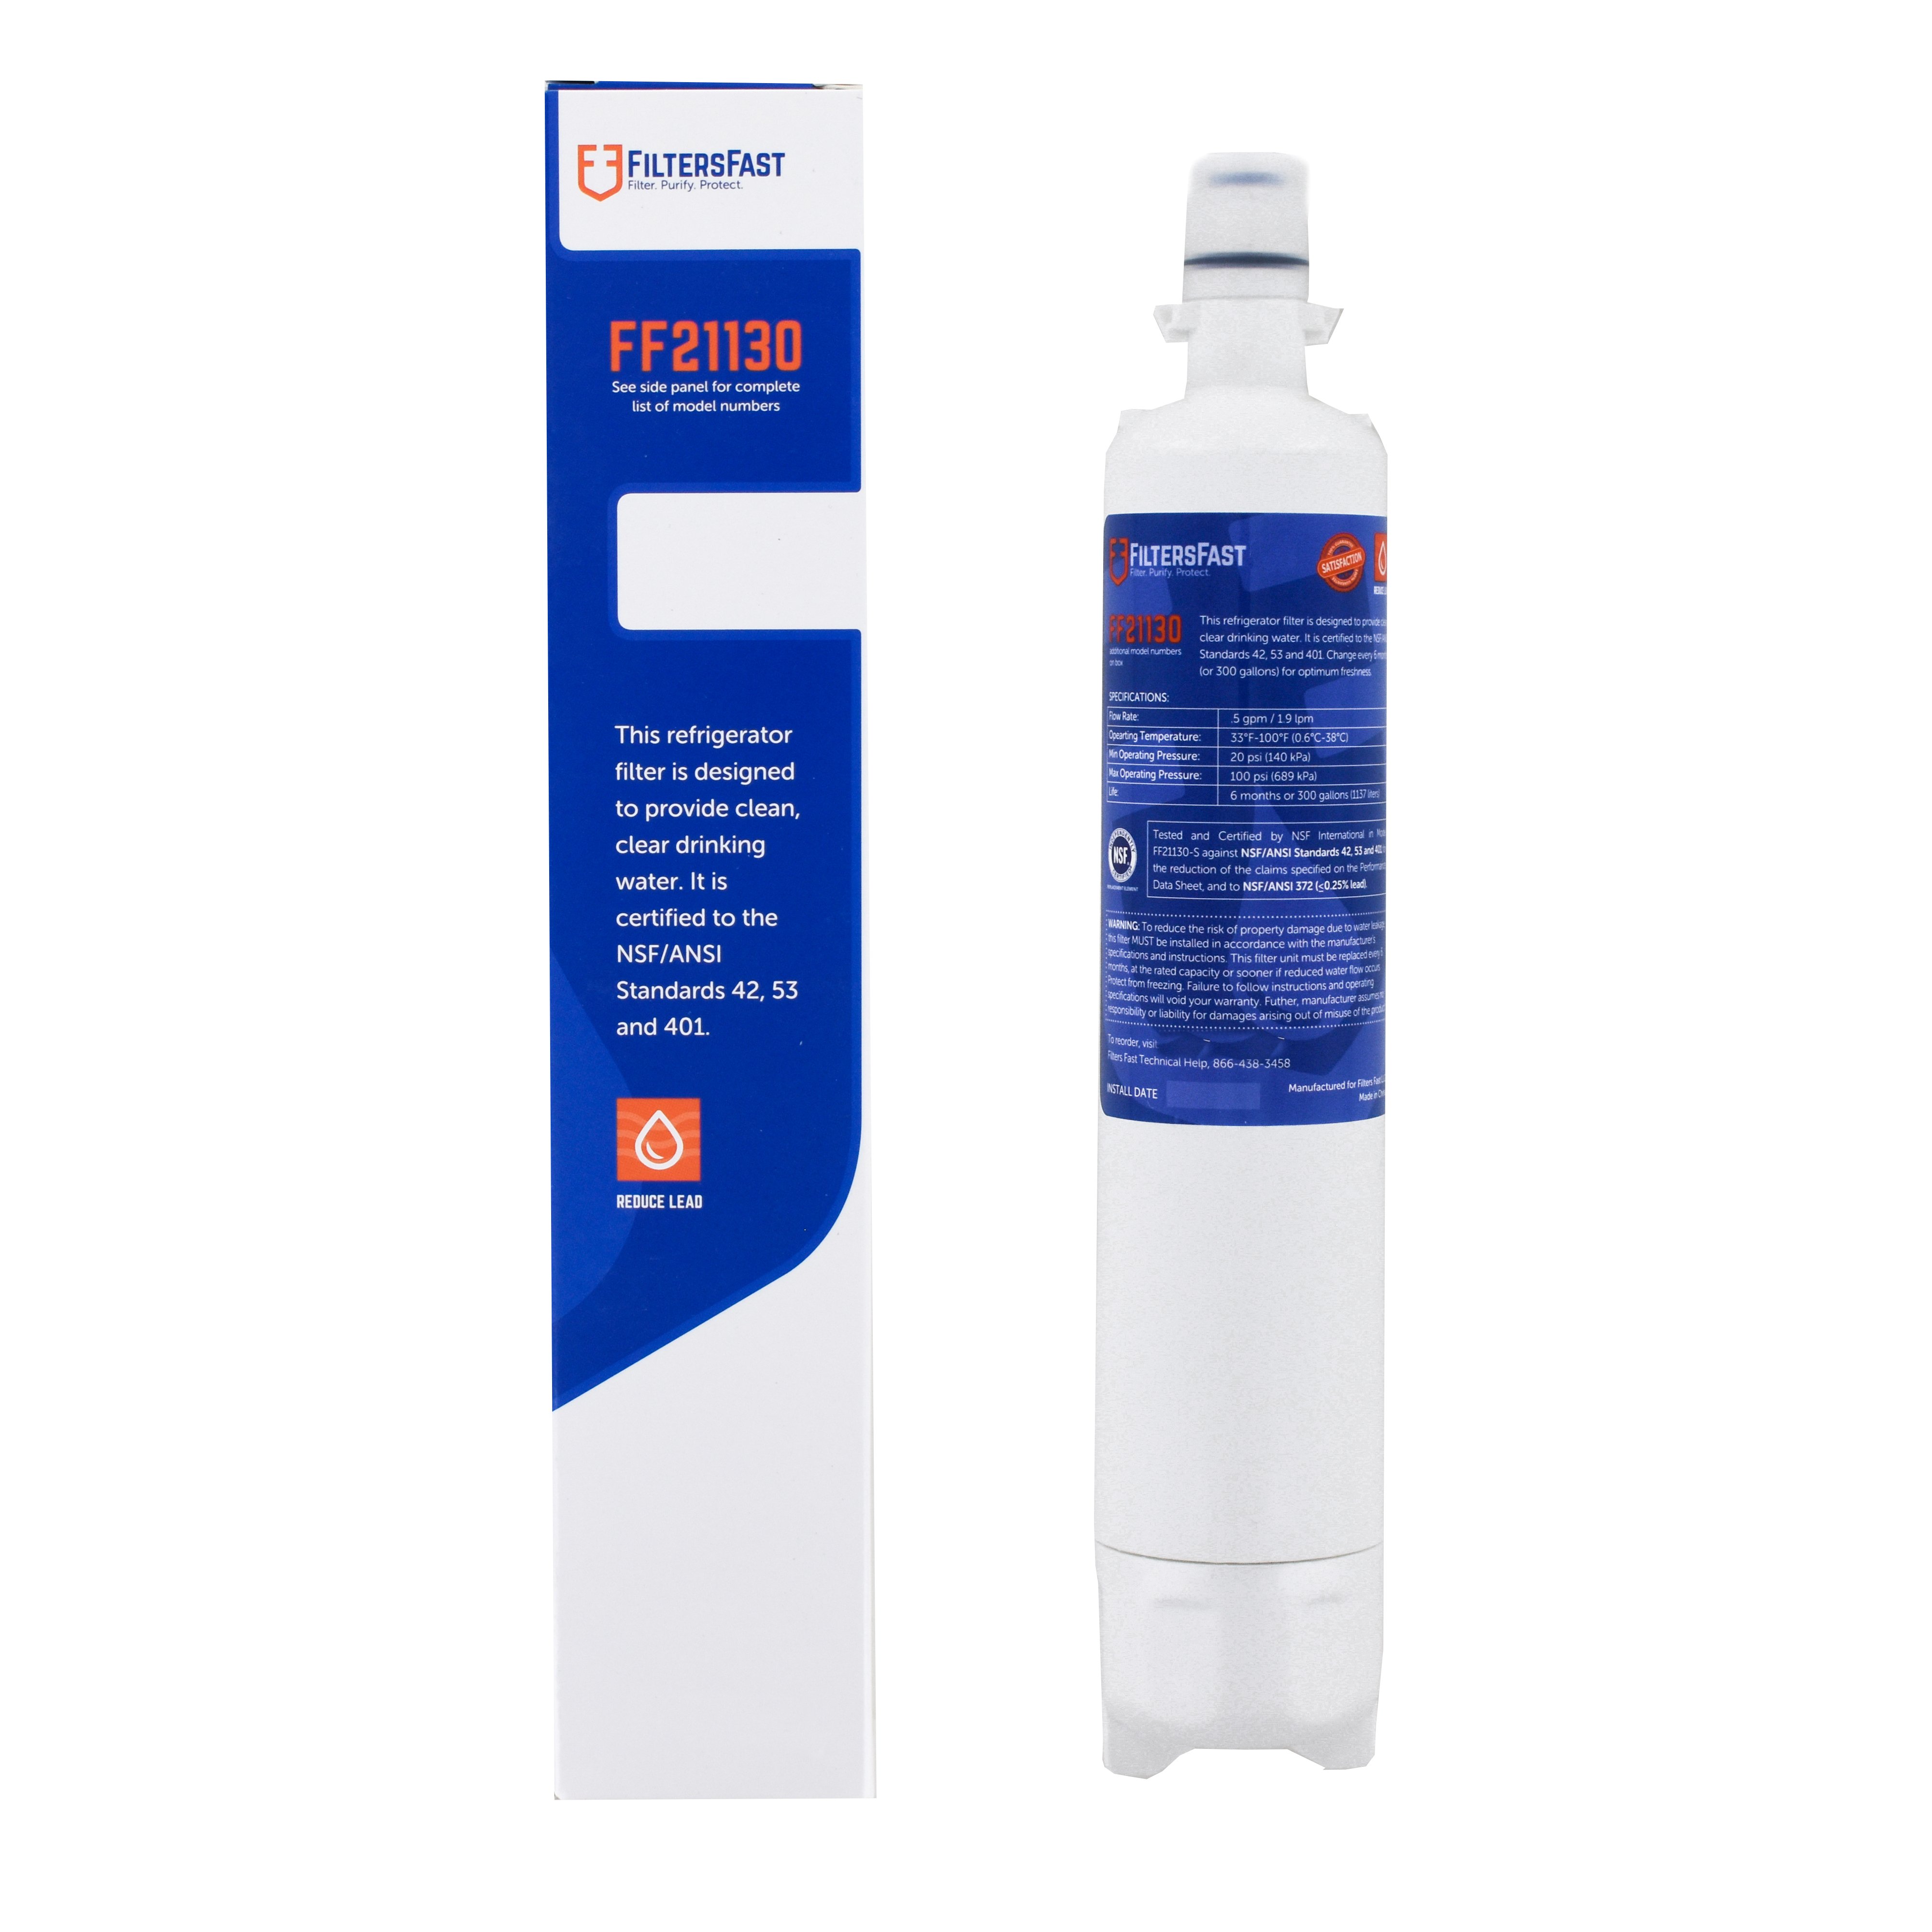 Filters Fast&reg; FF21130 Replacement Refrigerator Water Filter